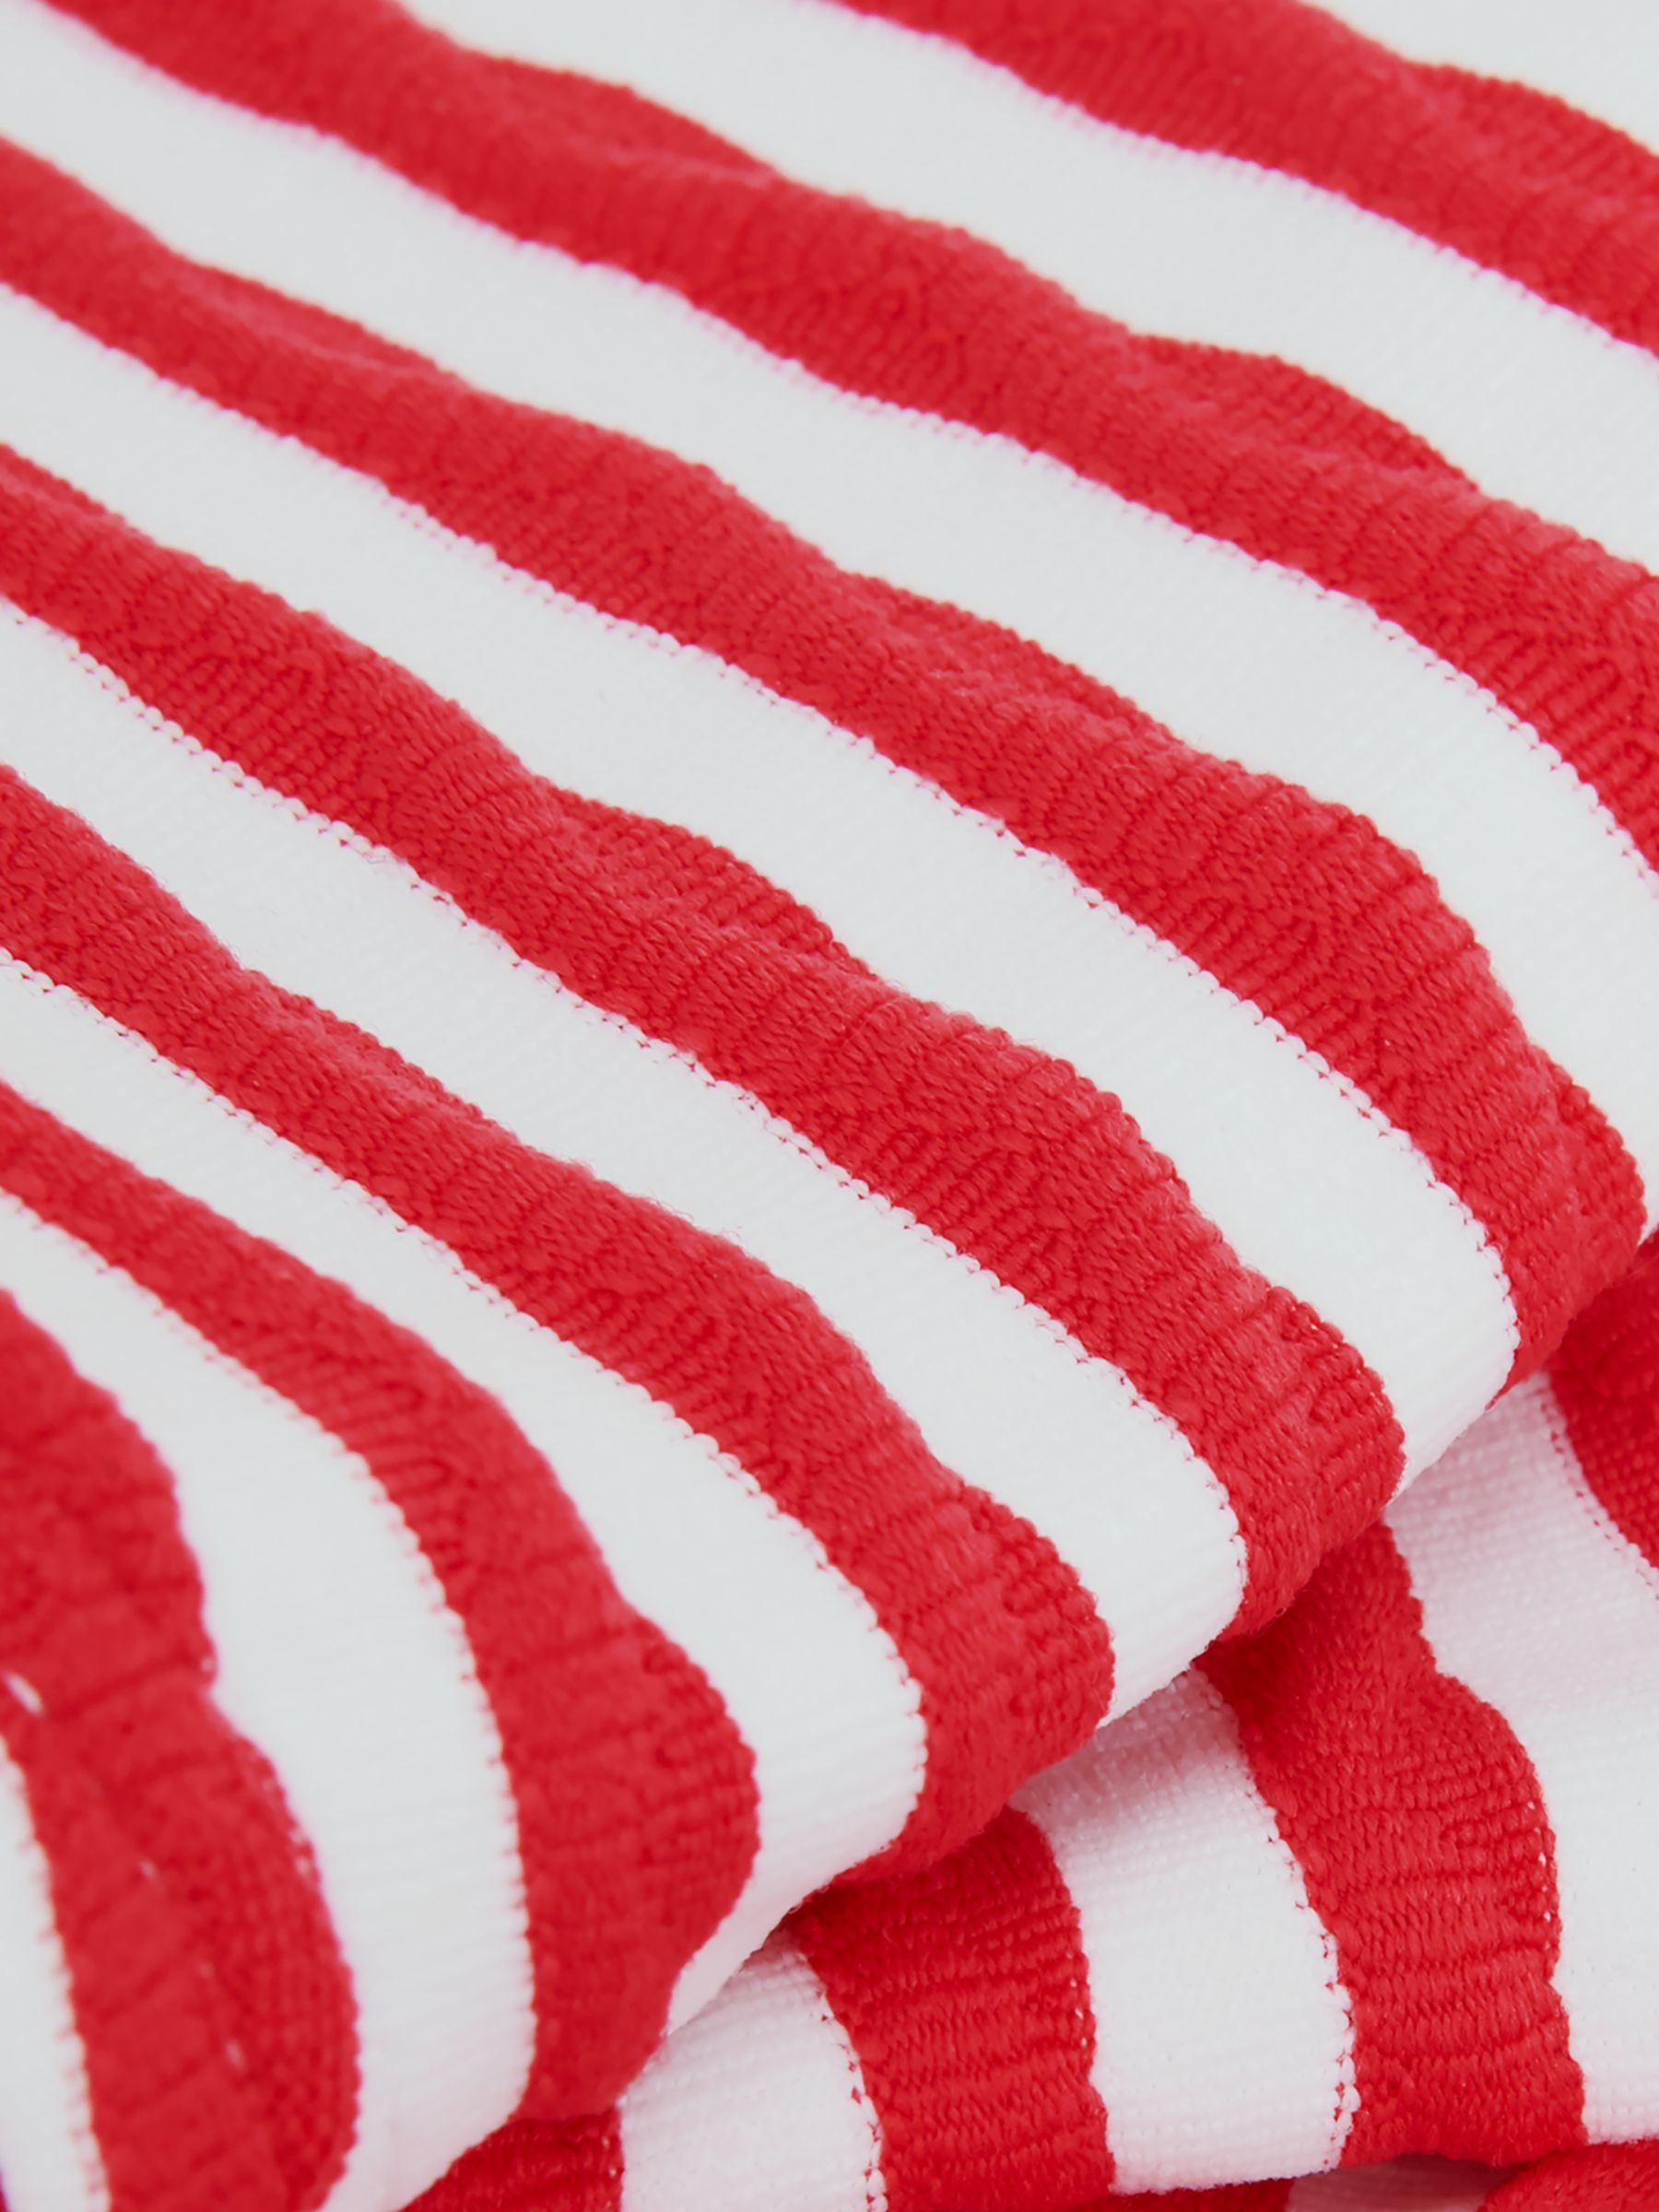 Buy Phase Eight Stripe Tankini Bottoms, Red/White Online at johnlewis.com